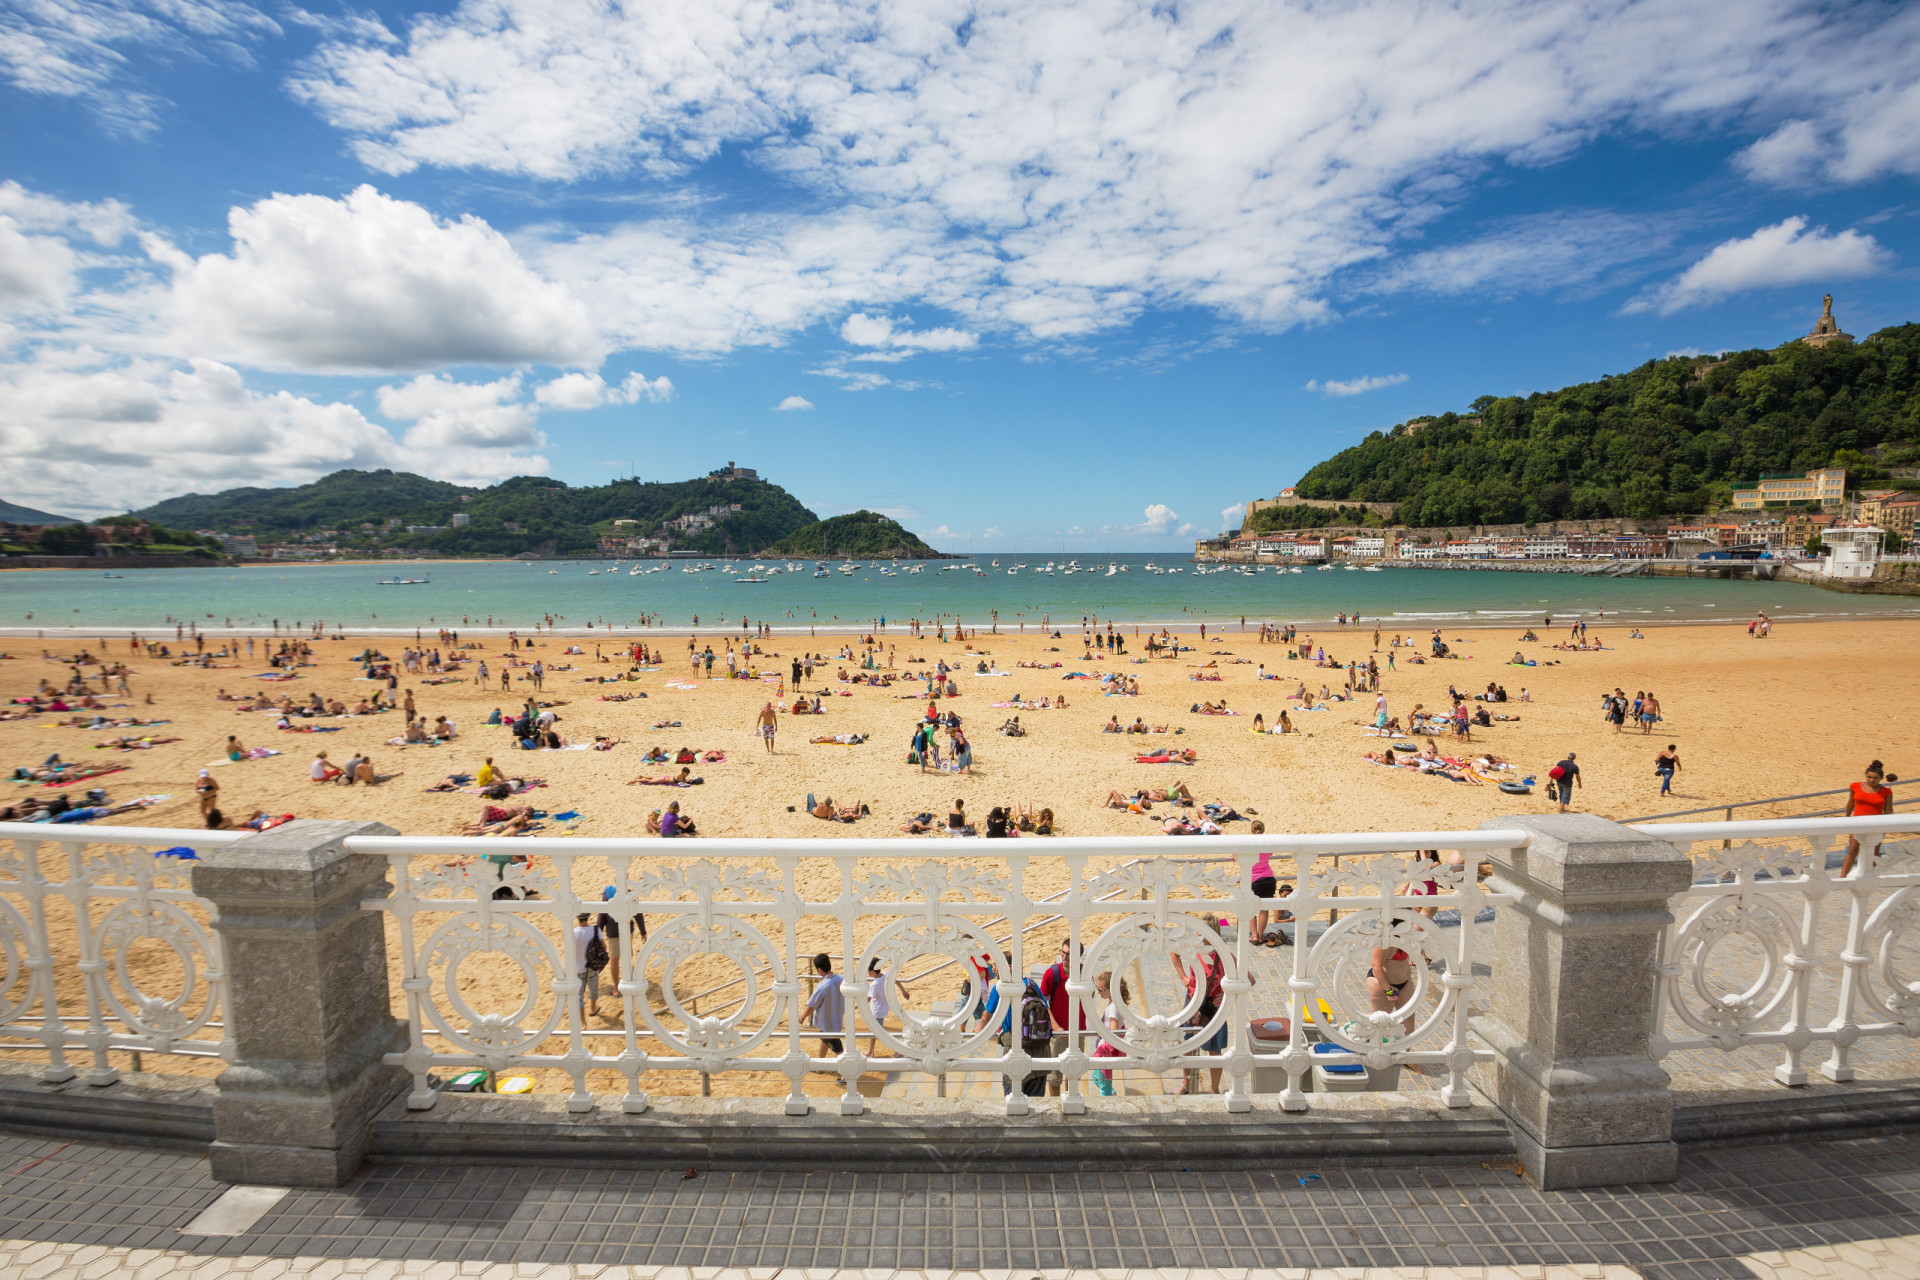 <p>Located in the Basque city of San Sebastián, this beach offers an ideal location, sparkling clean waters, and balmy weather.</p> <p>Sources: (BookRetreats) (Time Out) </p> <p>See also: <a href="https://www.starsinsider.com/travel/439828/cities-with-impressive-beaches-on-their-doorstep">Cities with impressive beaches on their doorstep</a></p><p>You may also like:<a href="https://www.starsinsider.com/n/453142?utm_source=msn.com&utm_medium=display&utm_campaign=referral_description&utm_content=697708en-en_selected"> Girl dads: Famous fathers of daughters</a></p>